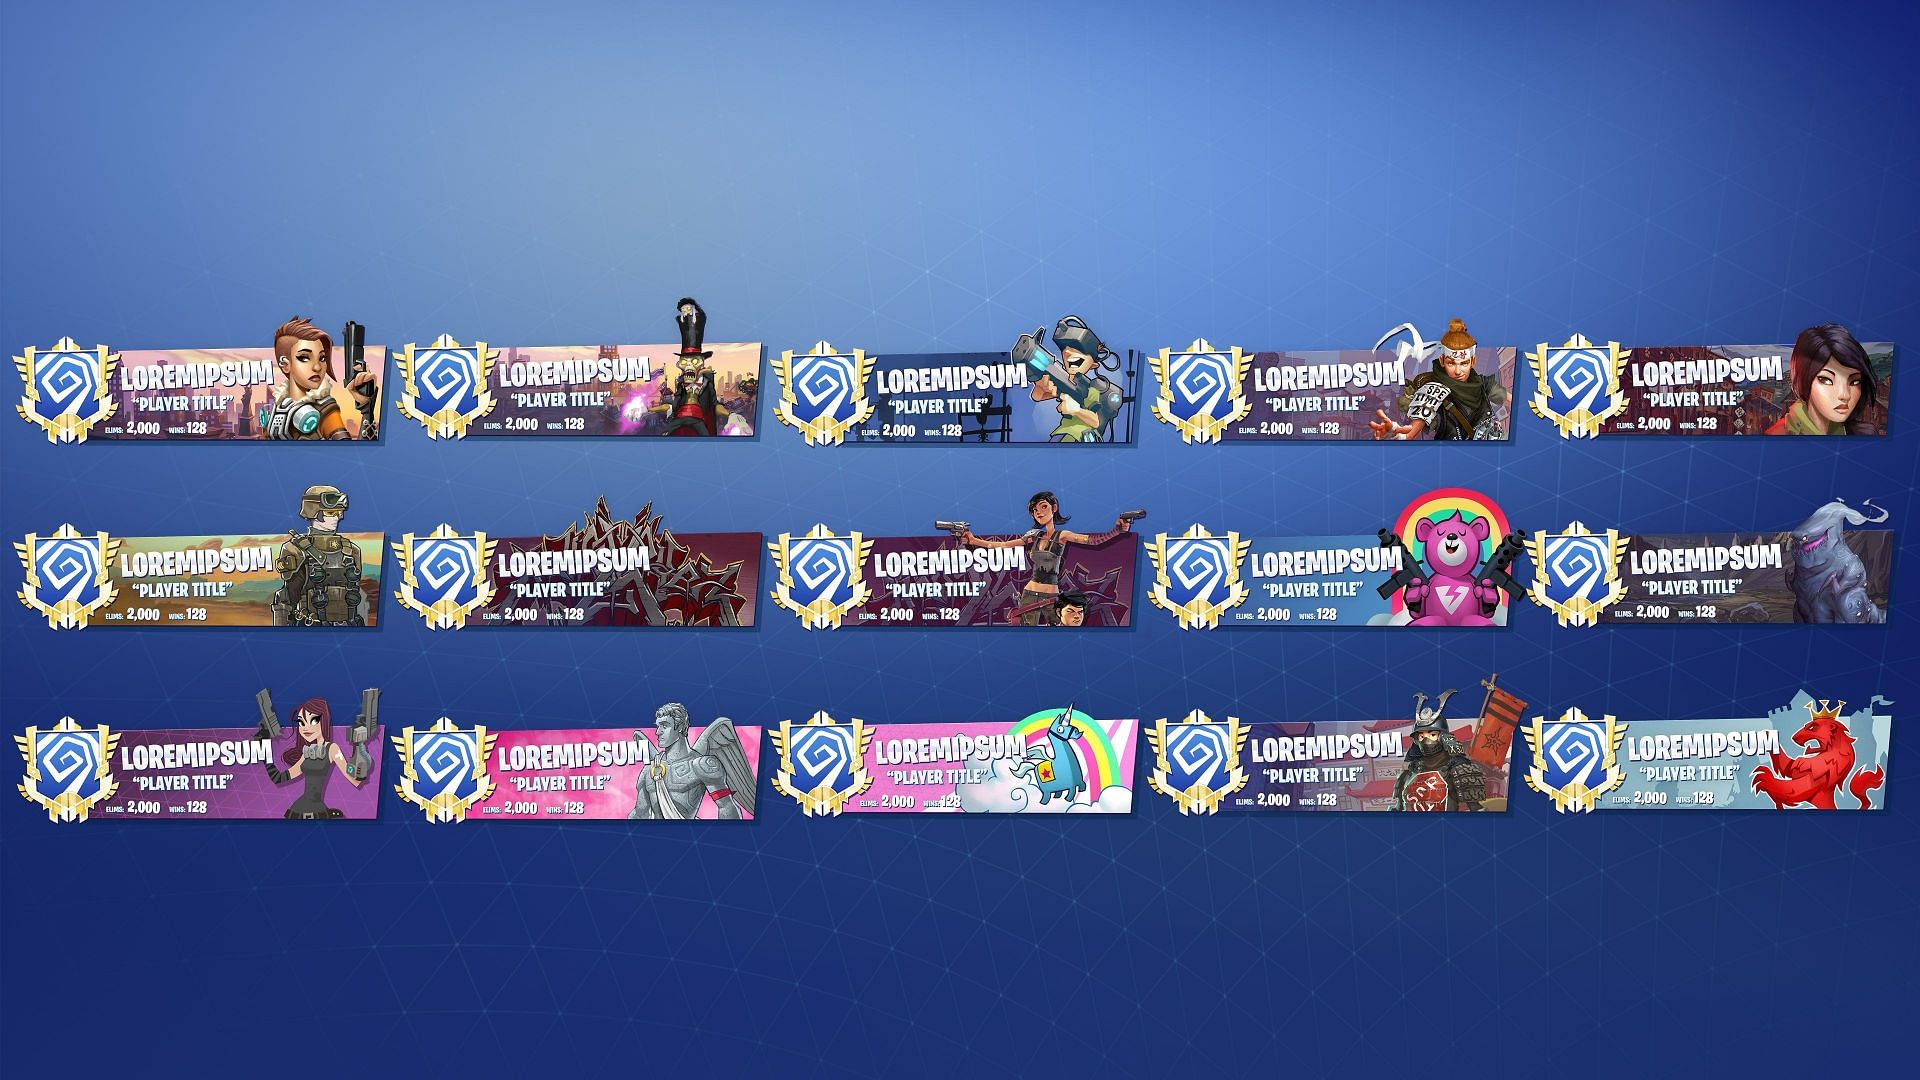 Calling Cards would have been a great addition to Fortnite (Image via Bryan Rathman)